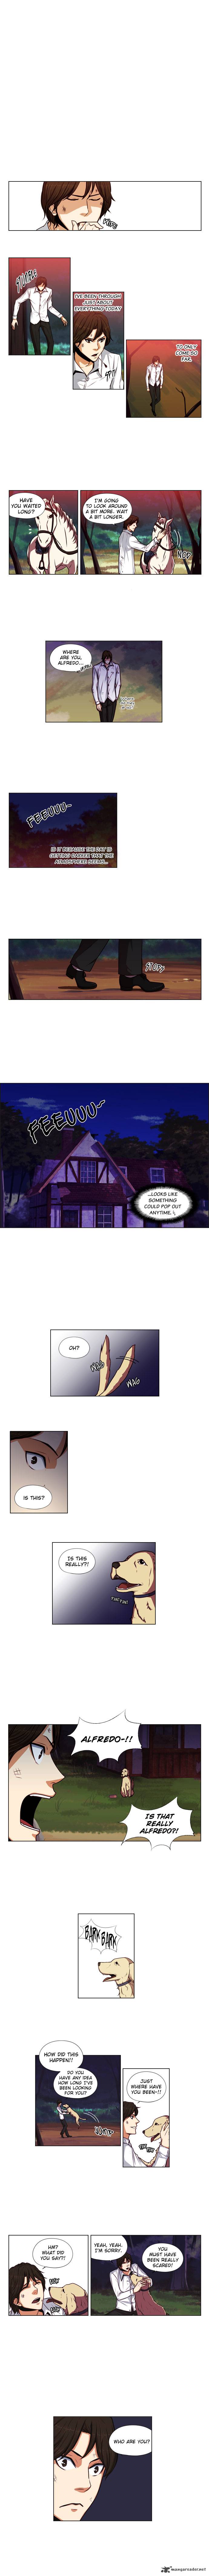 Serendipity Chapter 3 Page 3